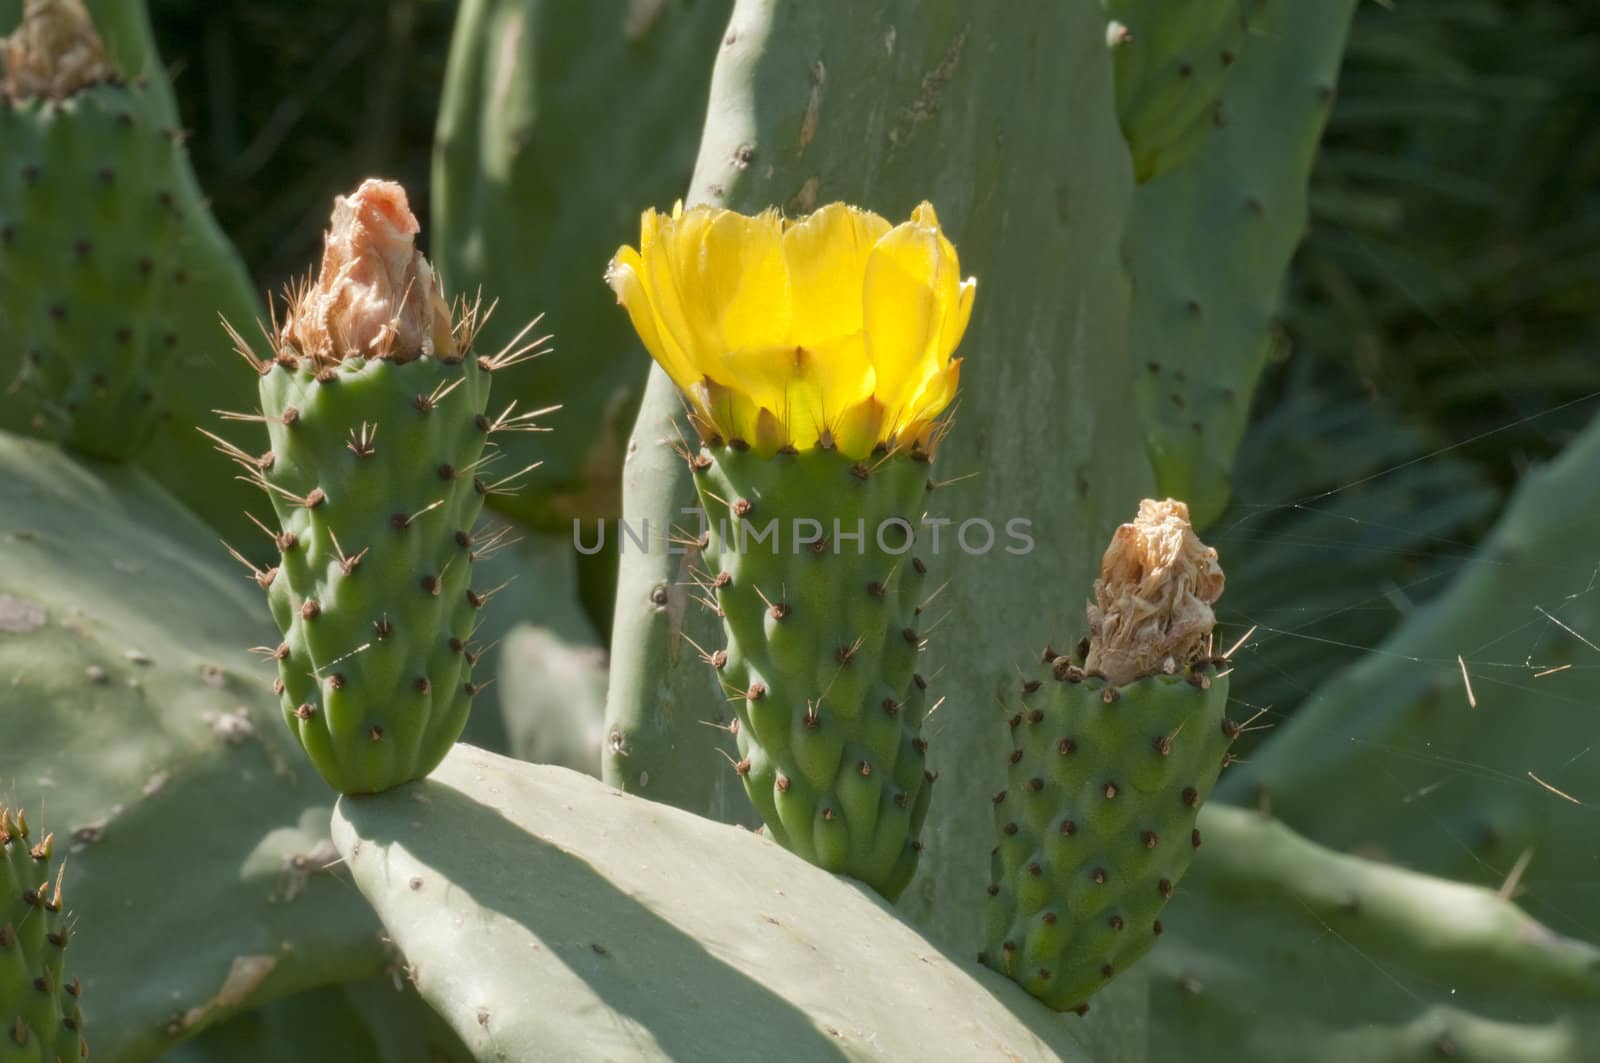 Prickly pear yellow flower of Opuntia ficus/indica